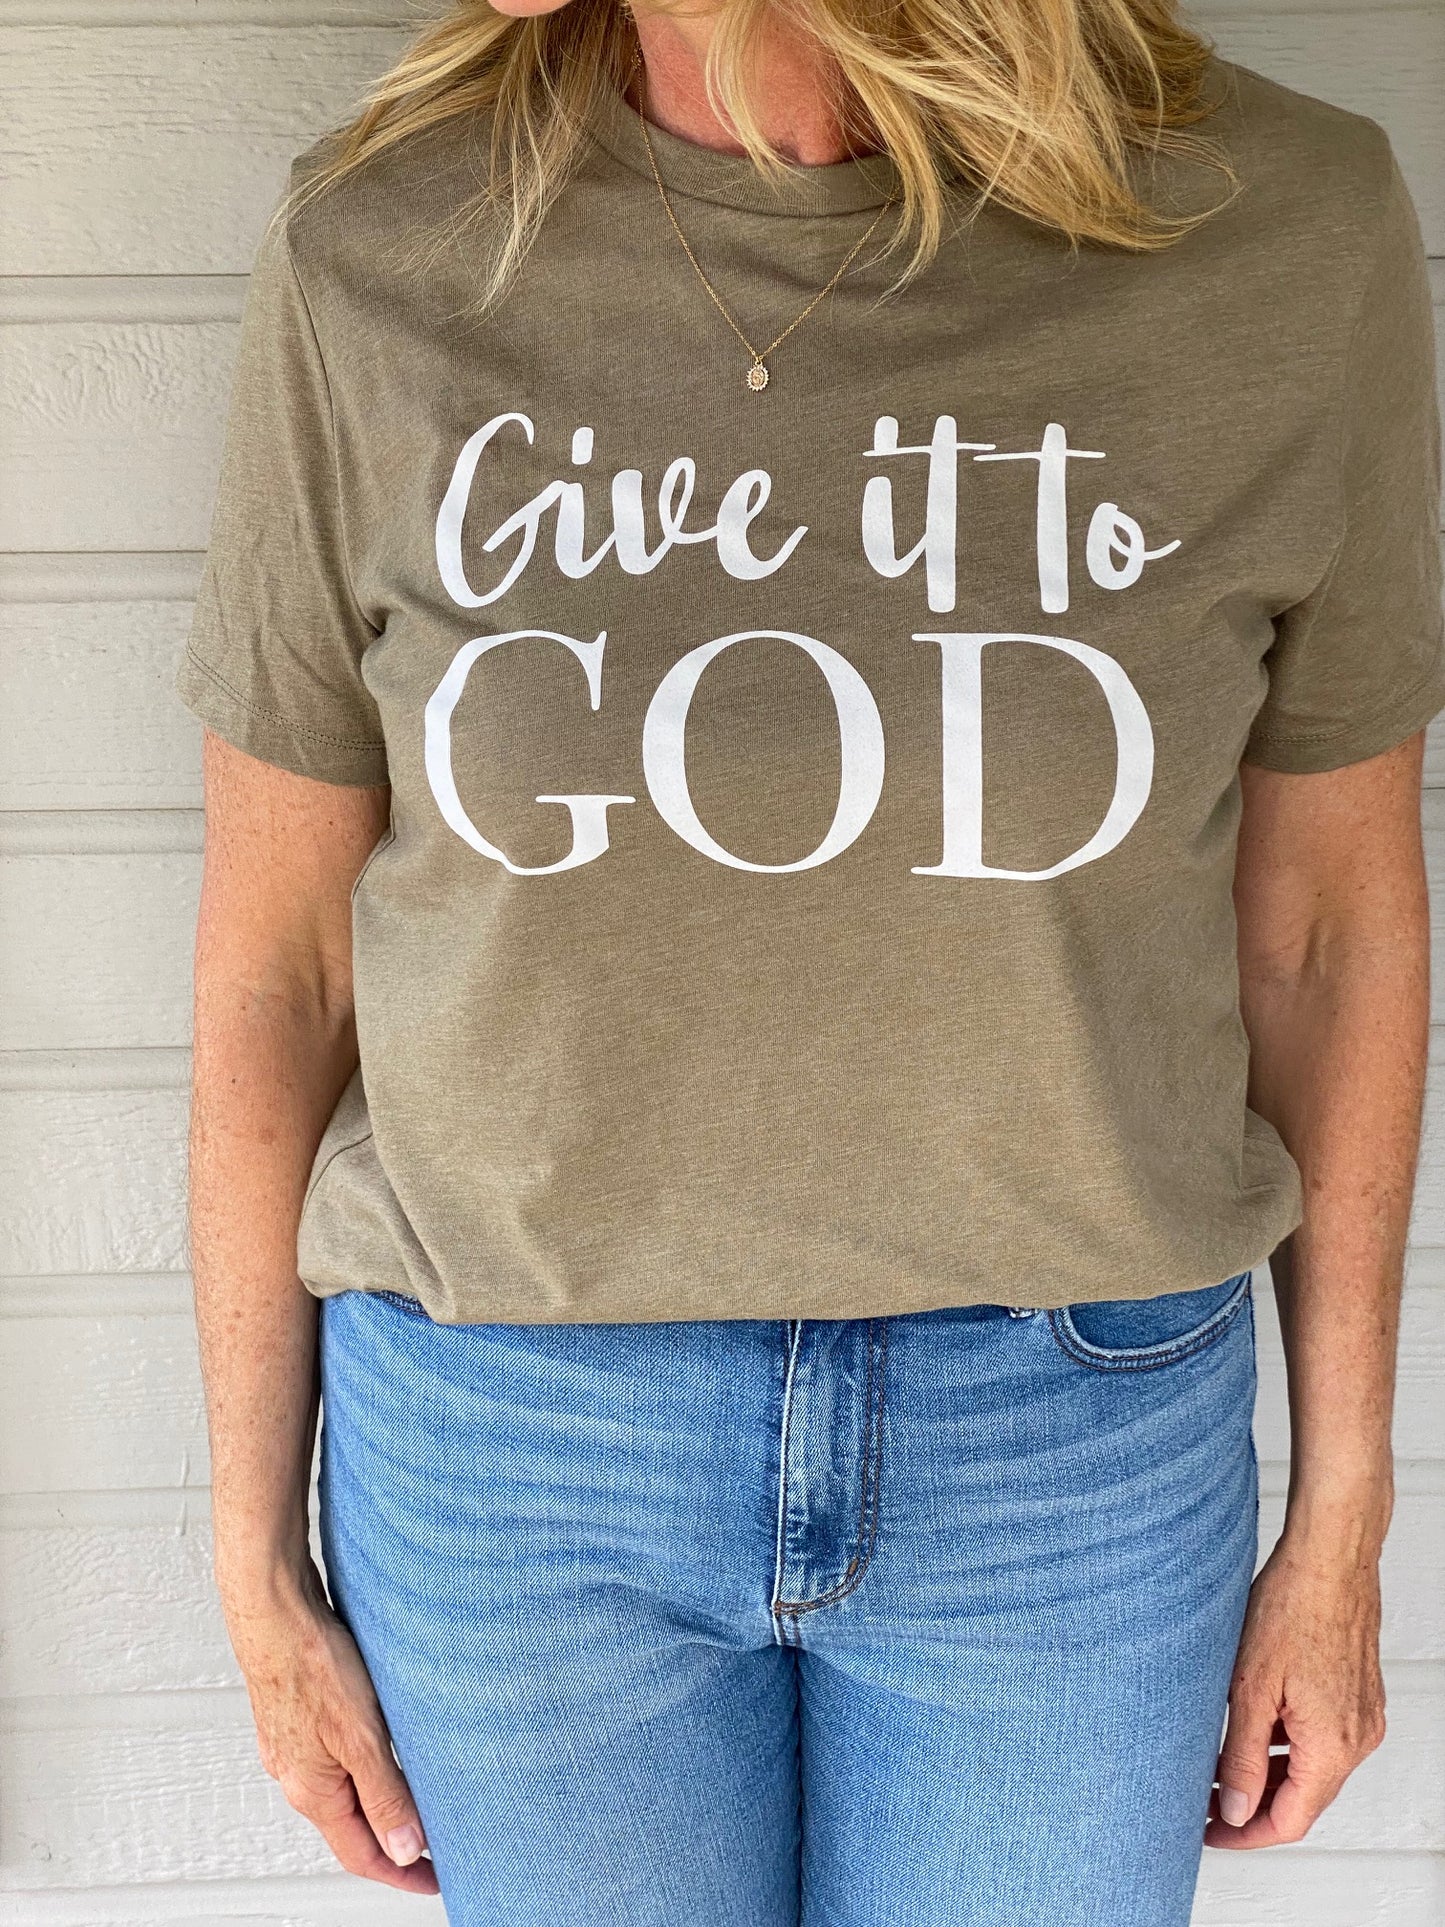 Give It To God Tee | Size Large | Assorted Colors